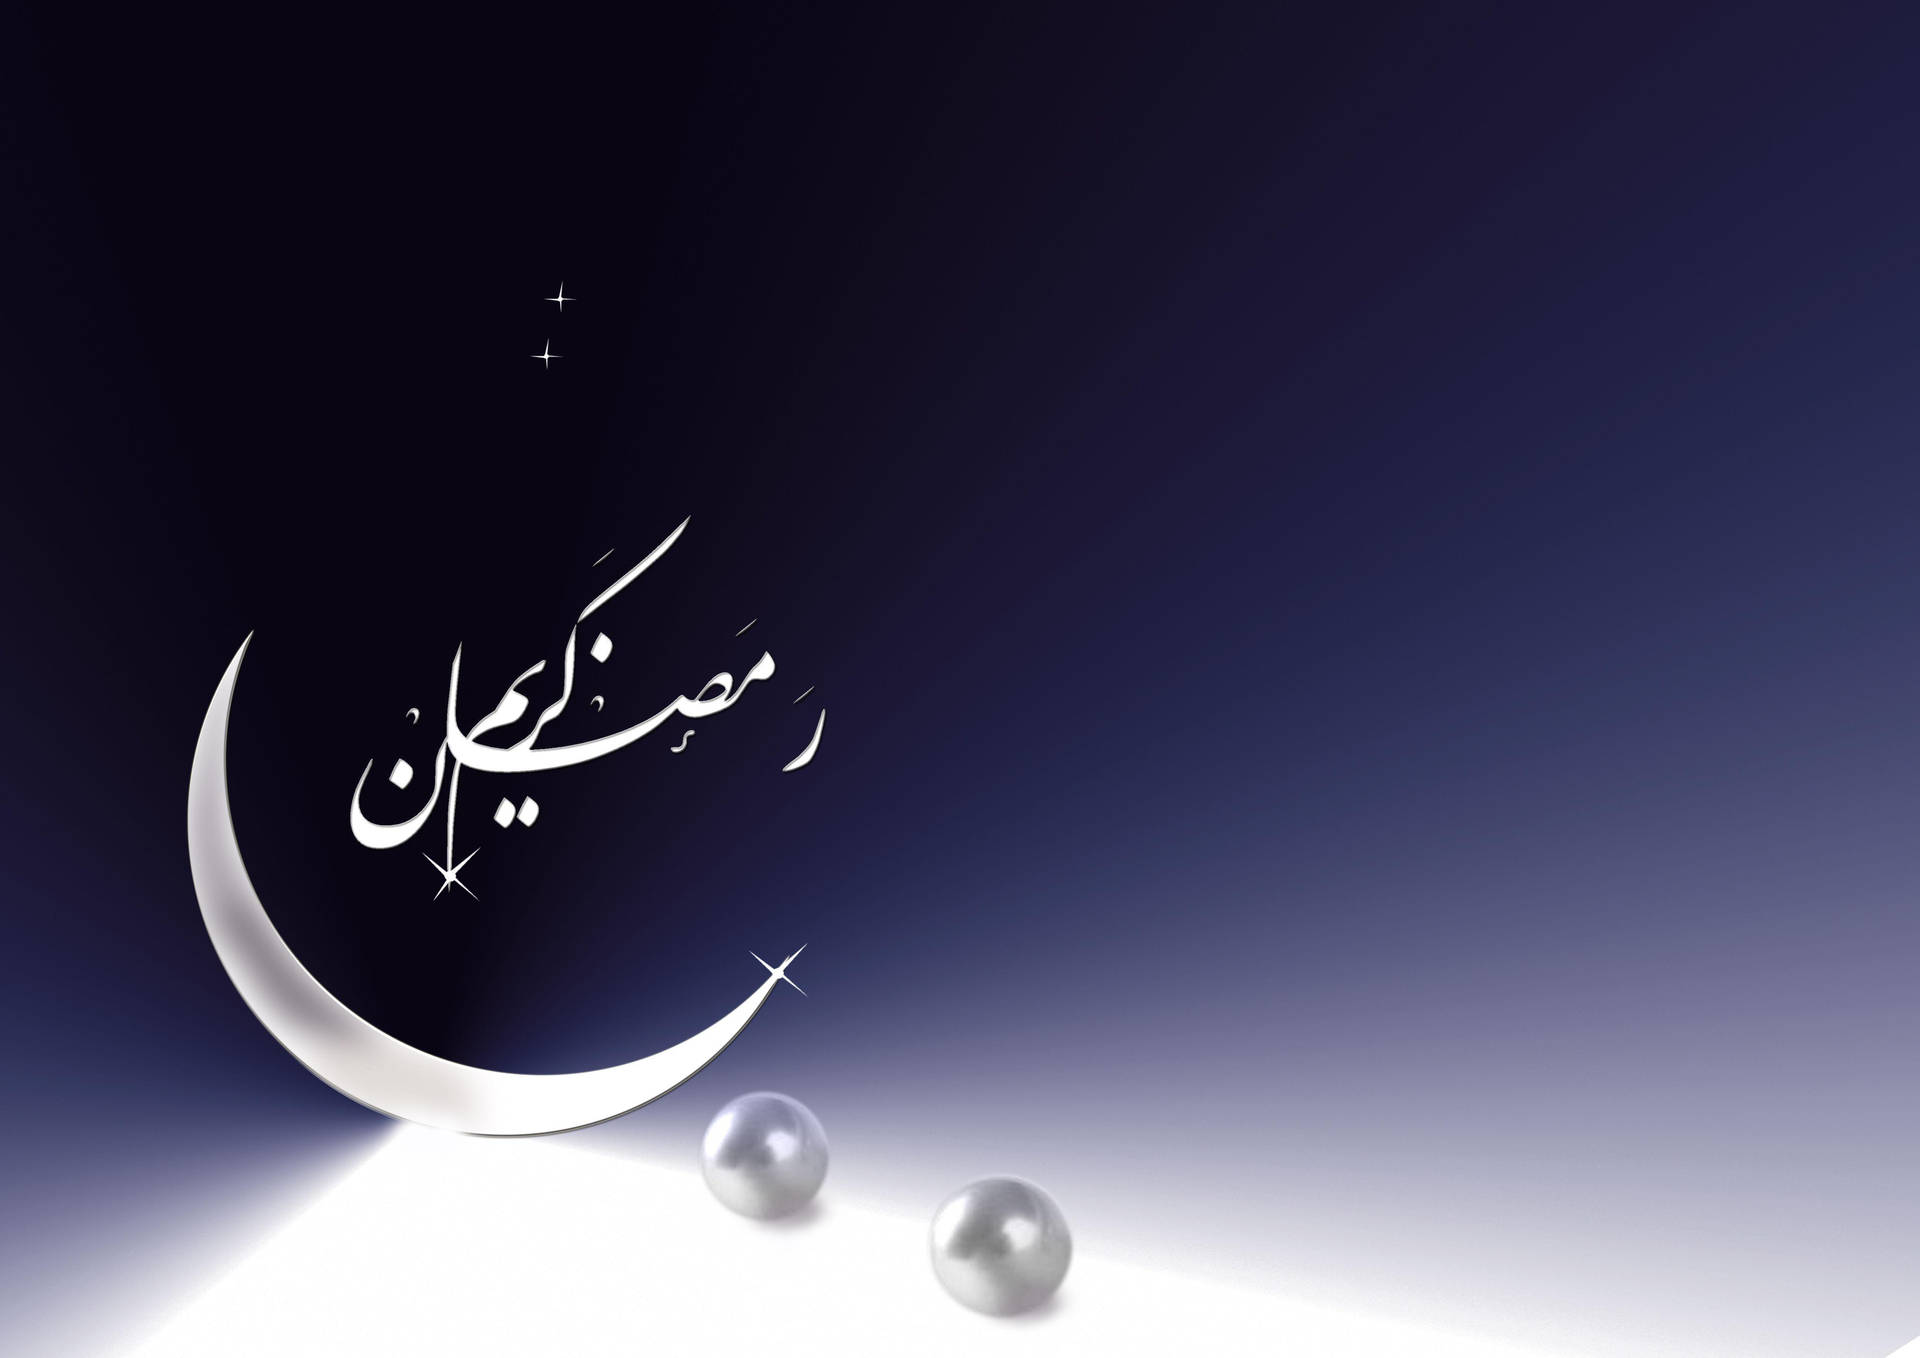 Ramadan With Pearls And Crescent Moon Wallpaper